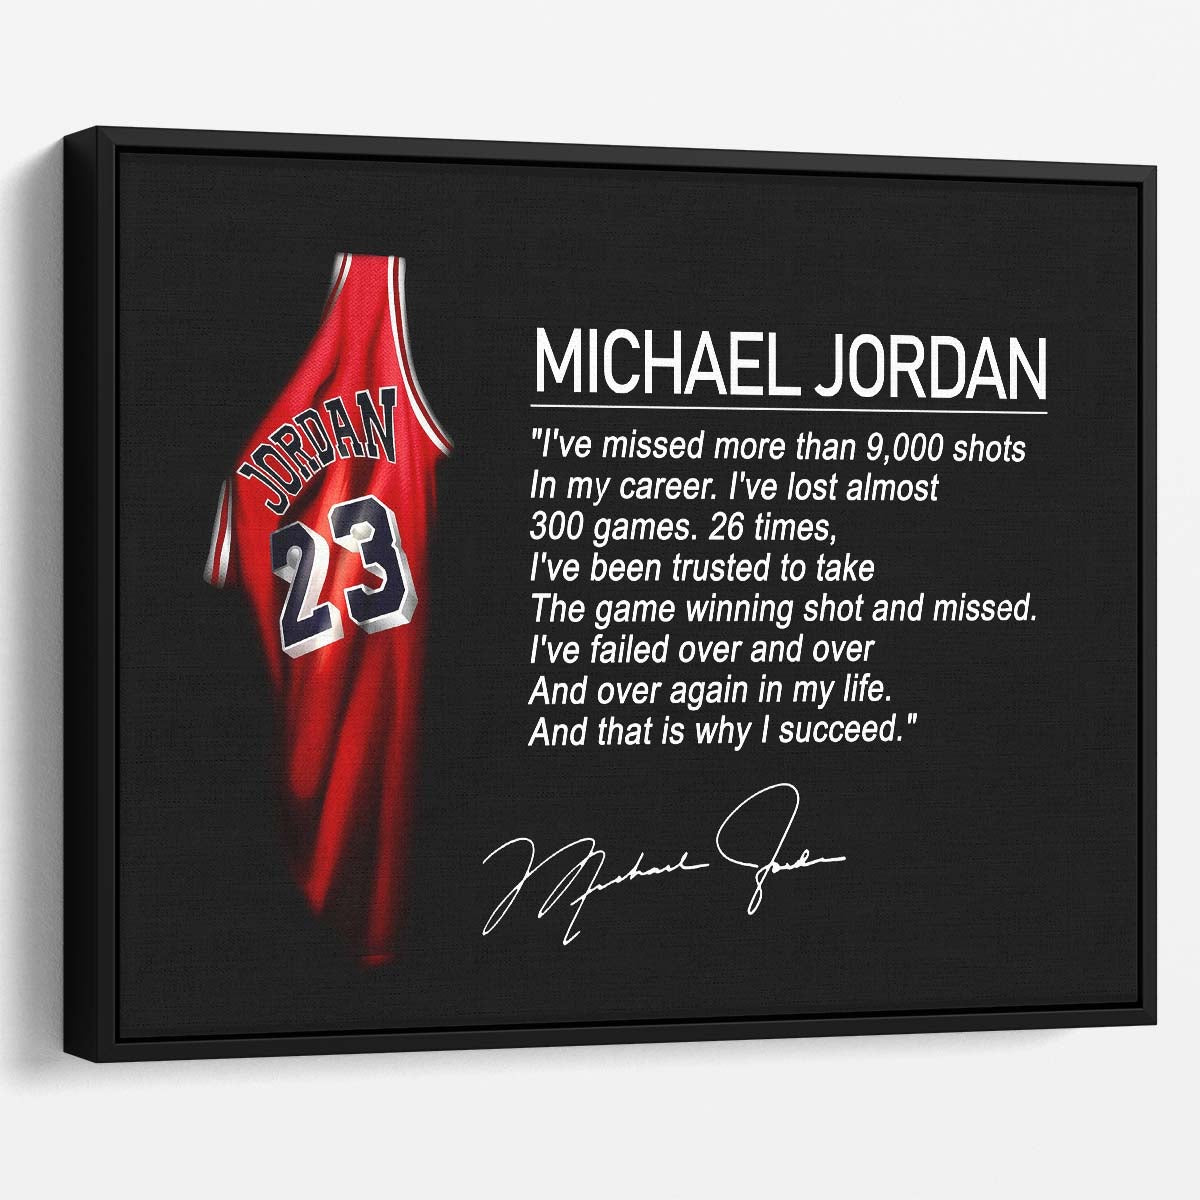 Michael Jordan I Succeed Because I Have Failed Wall Art by Luxuriance Designs. Made in USA.